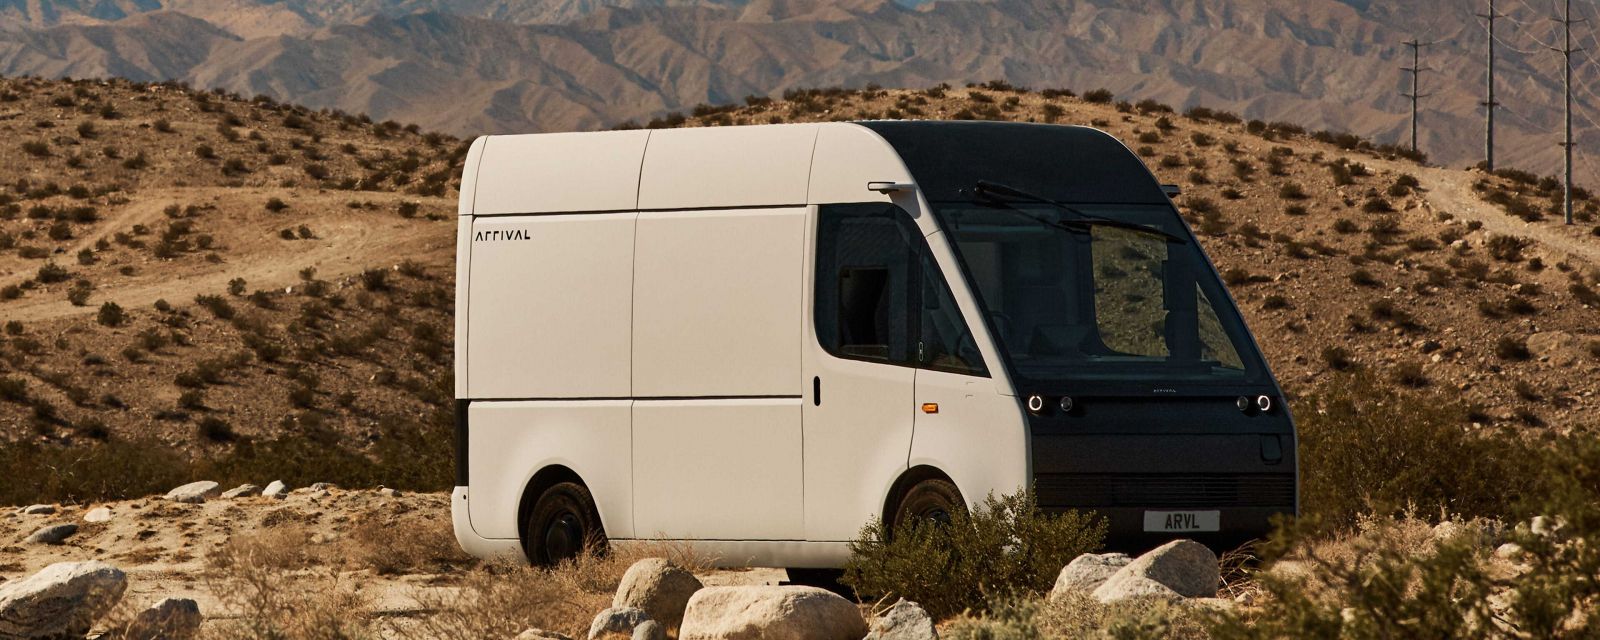 Arrival manufacturers electric vans and buses for fleet use. (Photo/Provided)